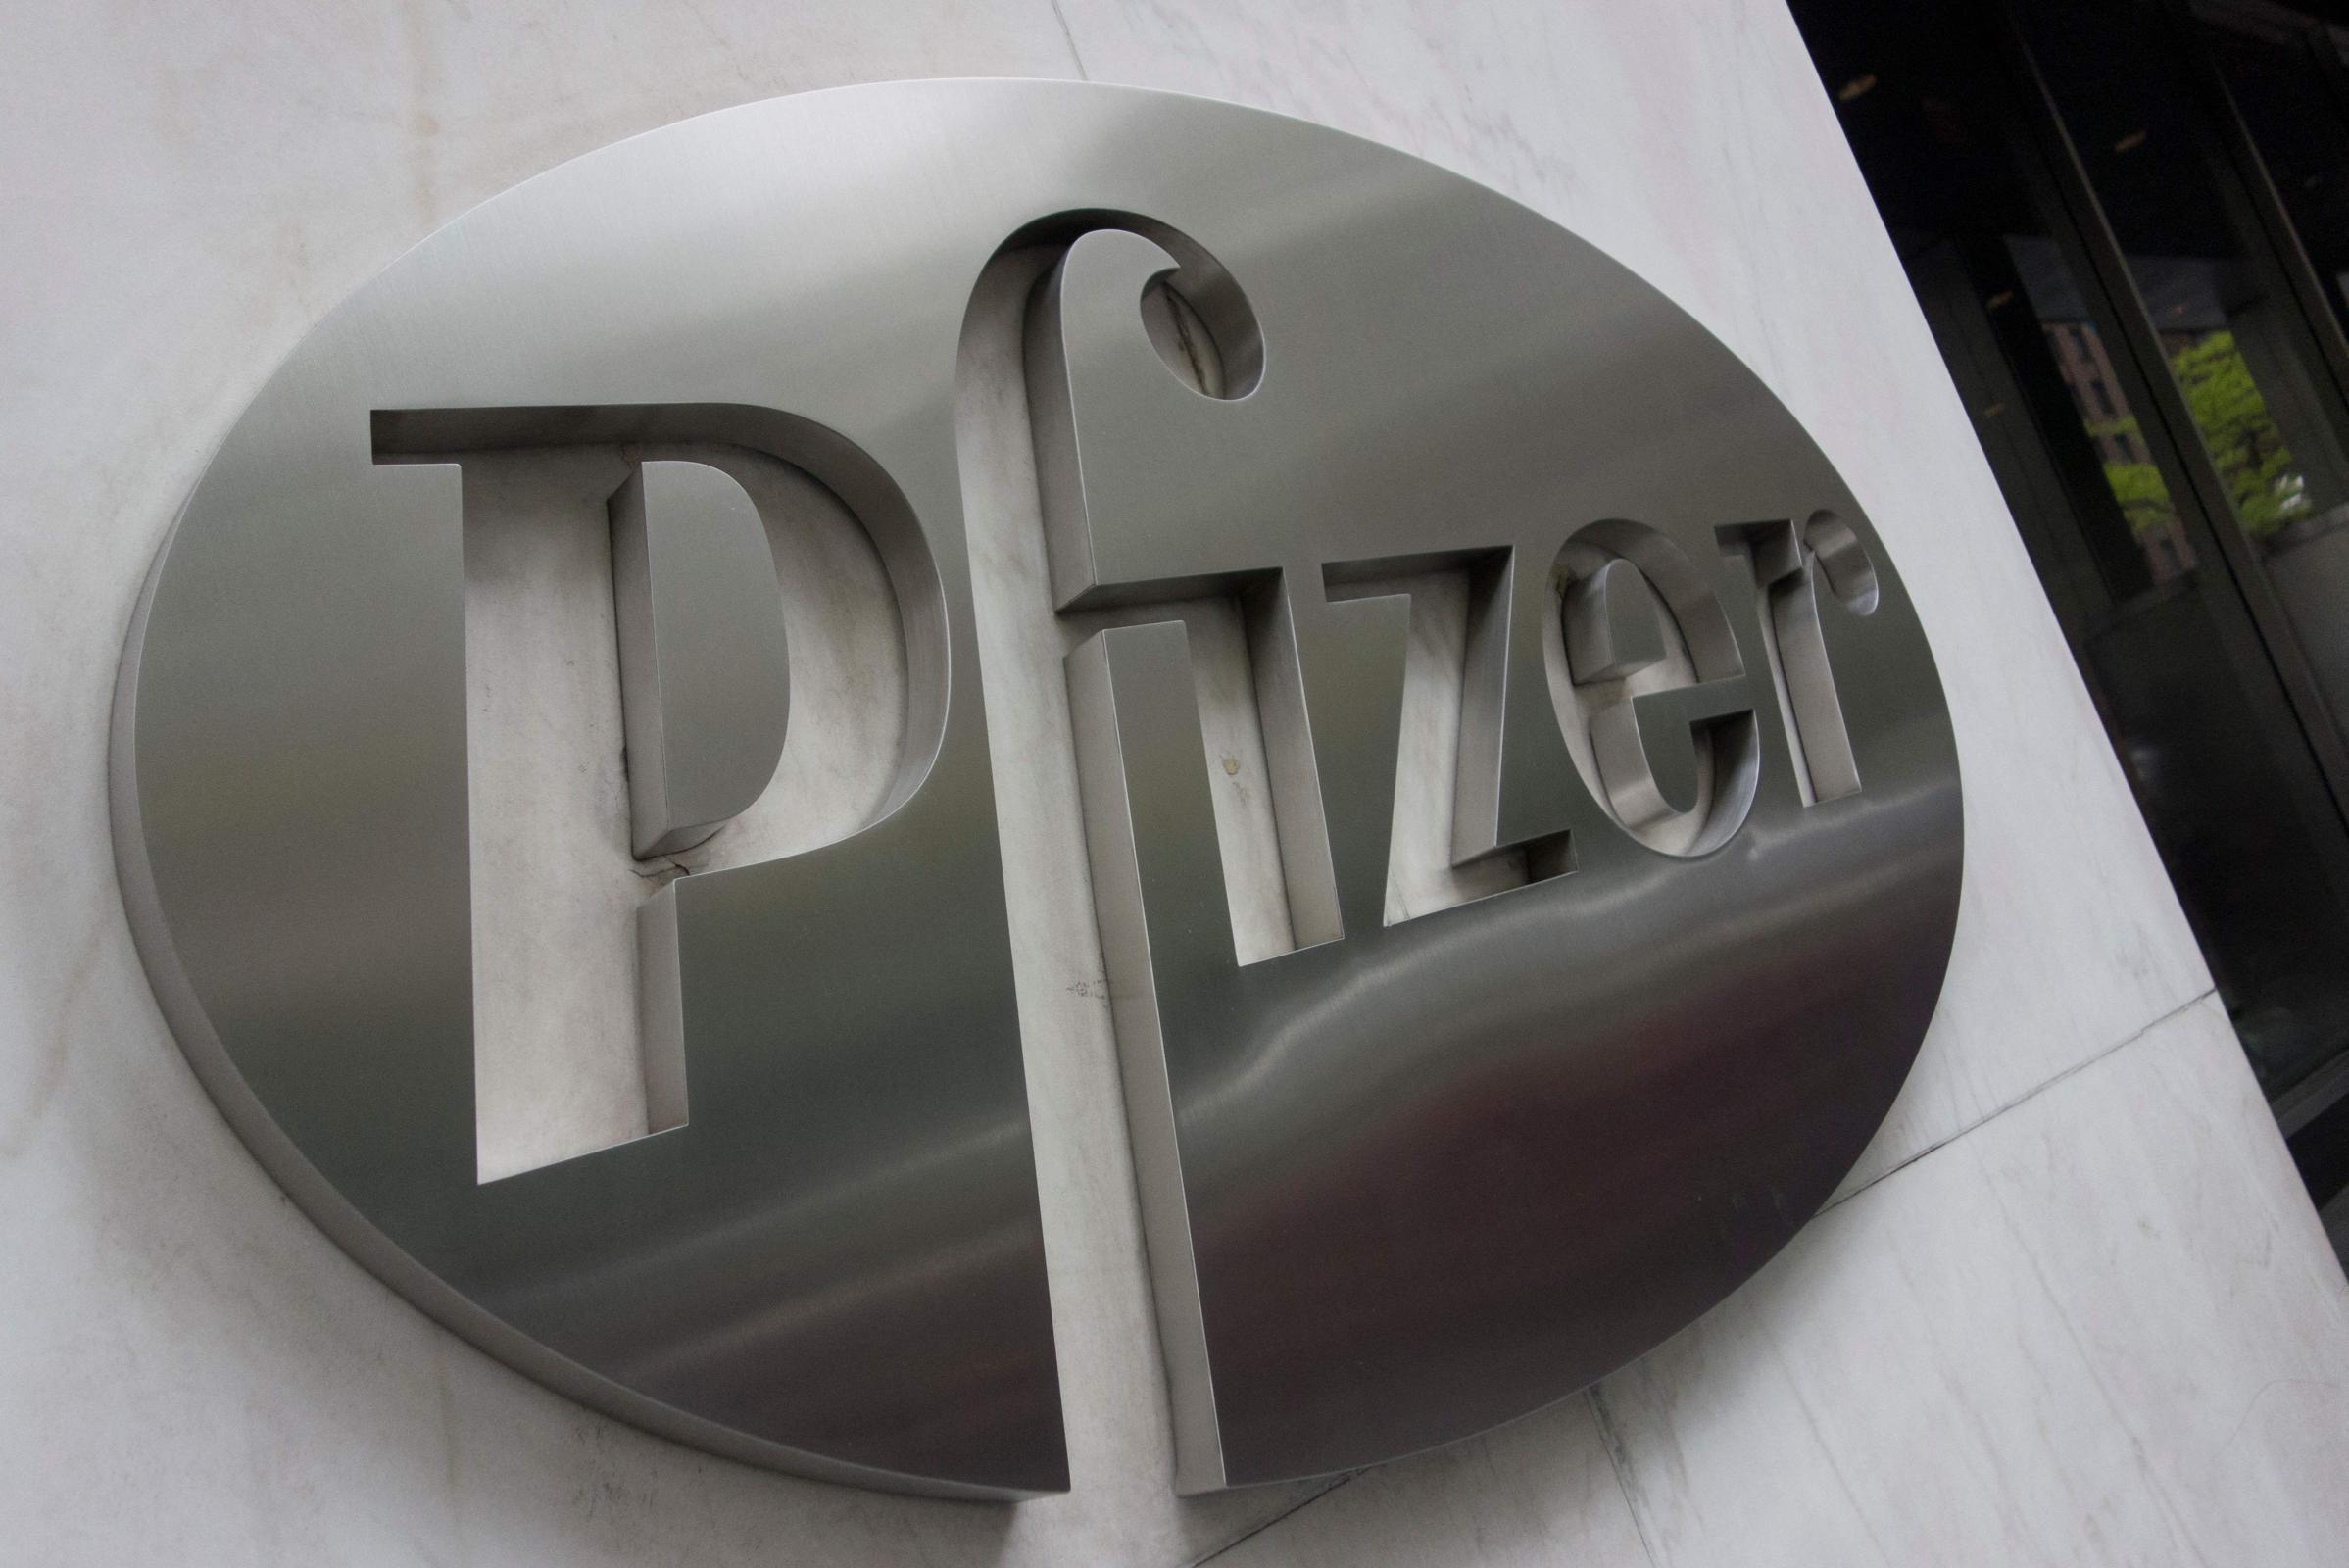 Pfizer places billions on the table for a blood disease specialist